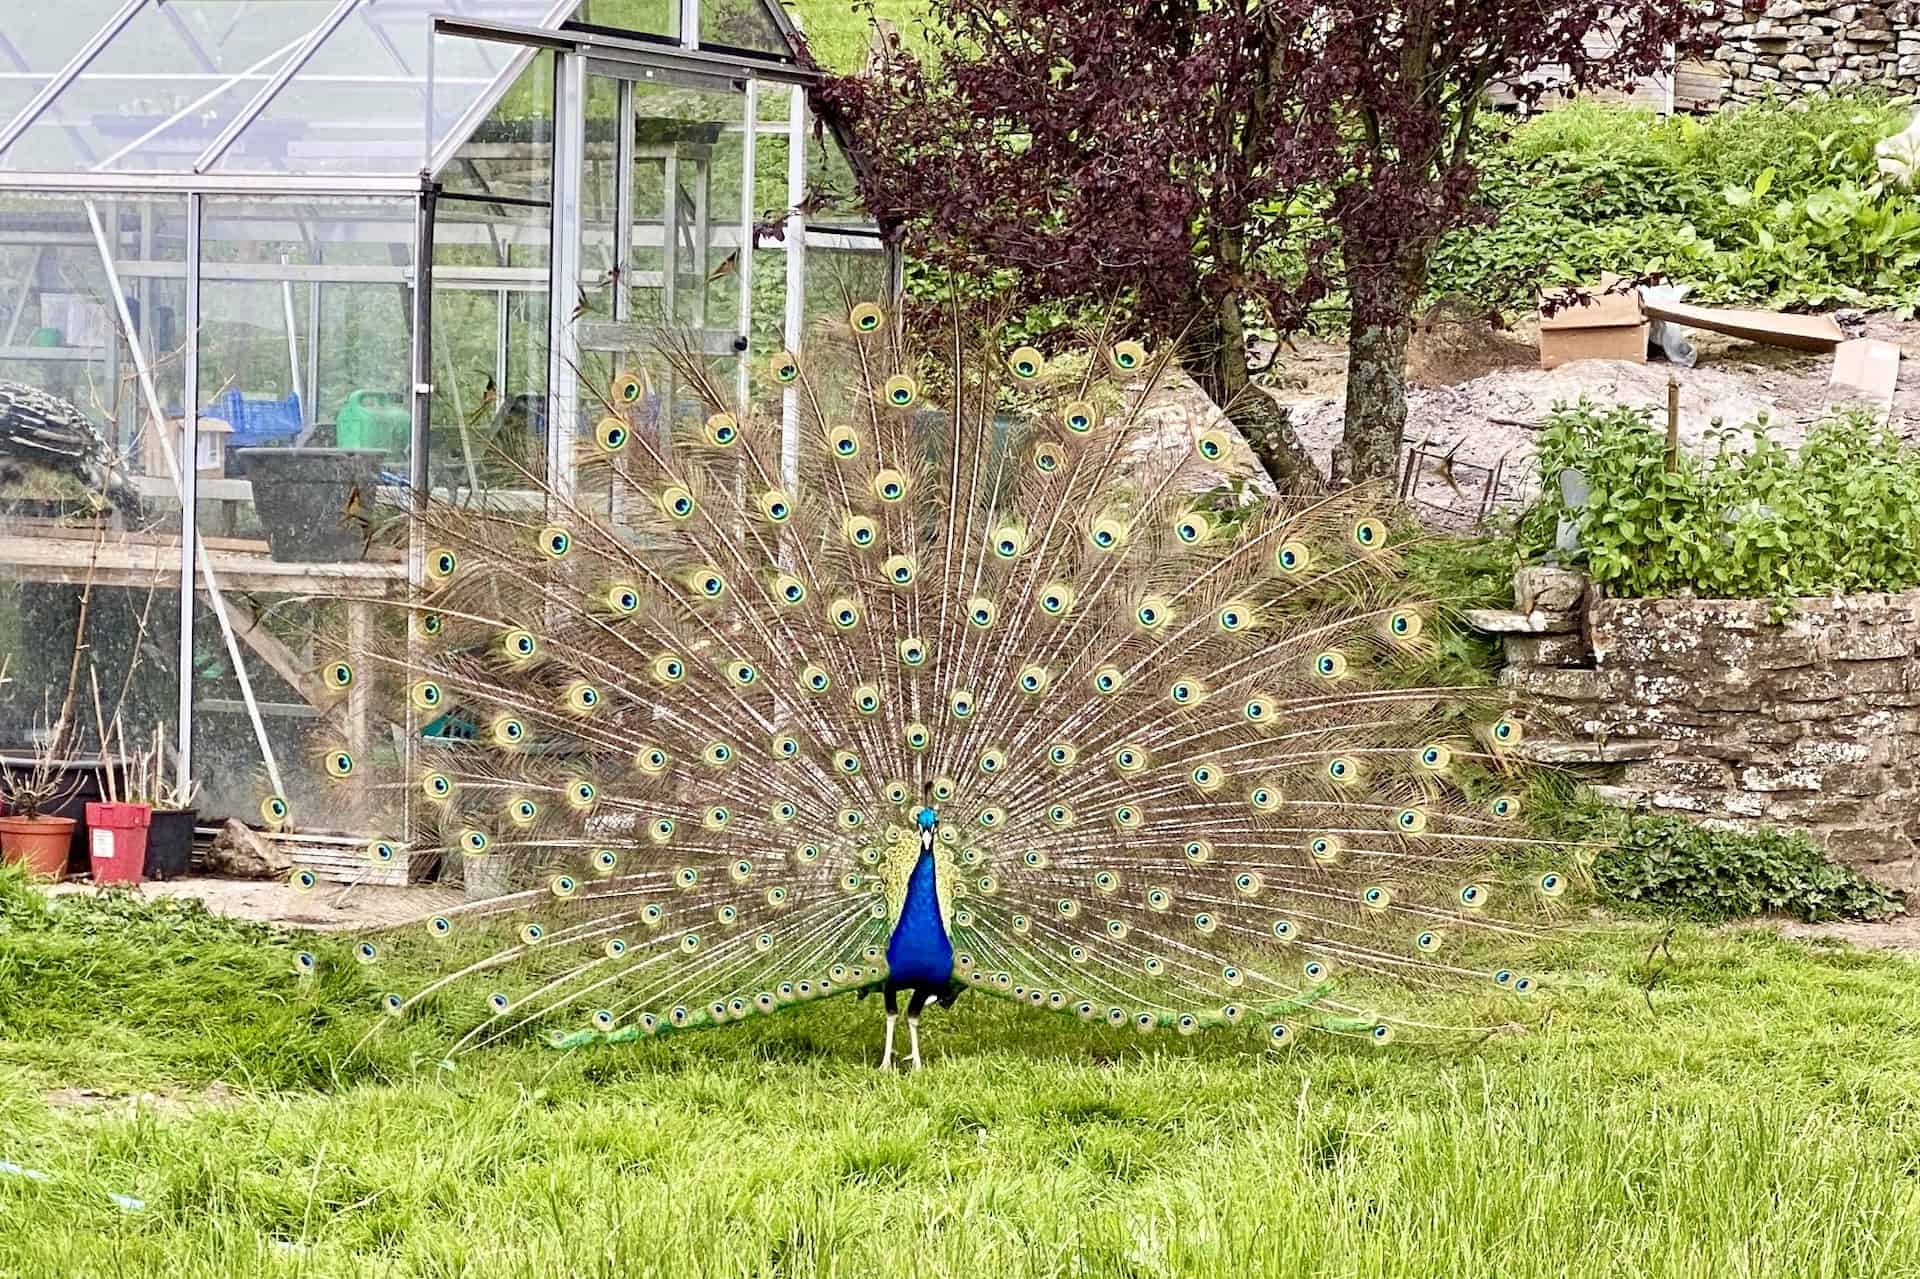 A peacock treats me to this wonderful display as I walk through the farm. The male birds grow their trains of iridescent feathers during the mating season, fanning them out and rattling them to attract a mate.